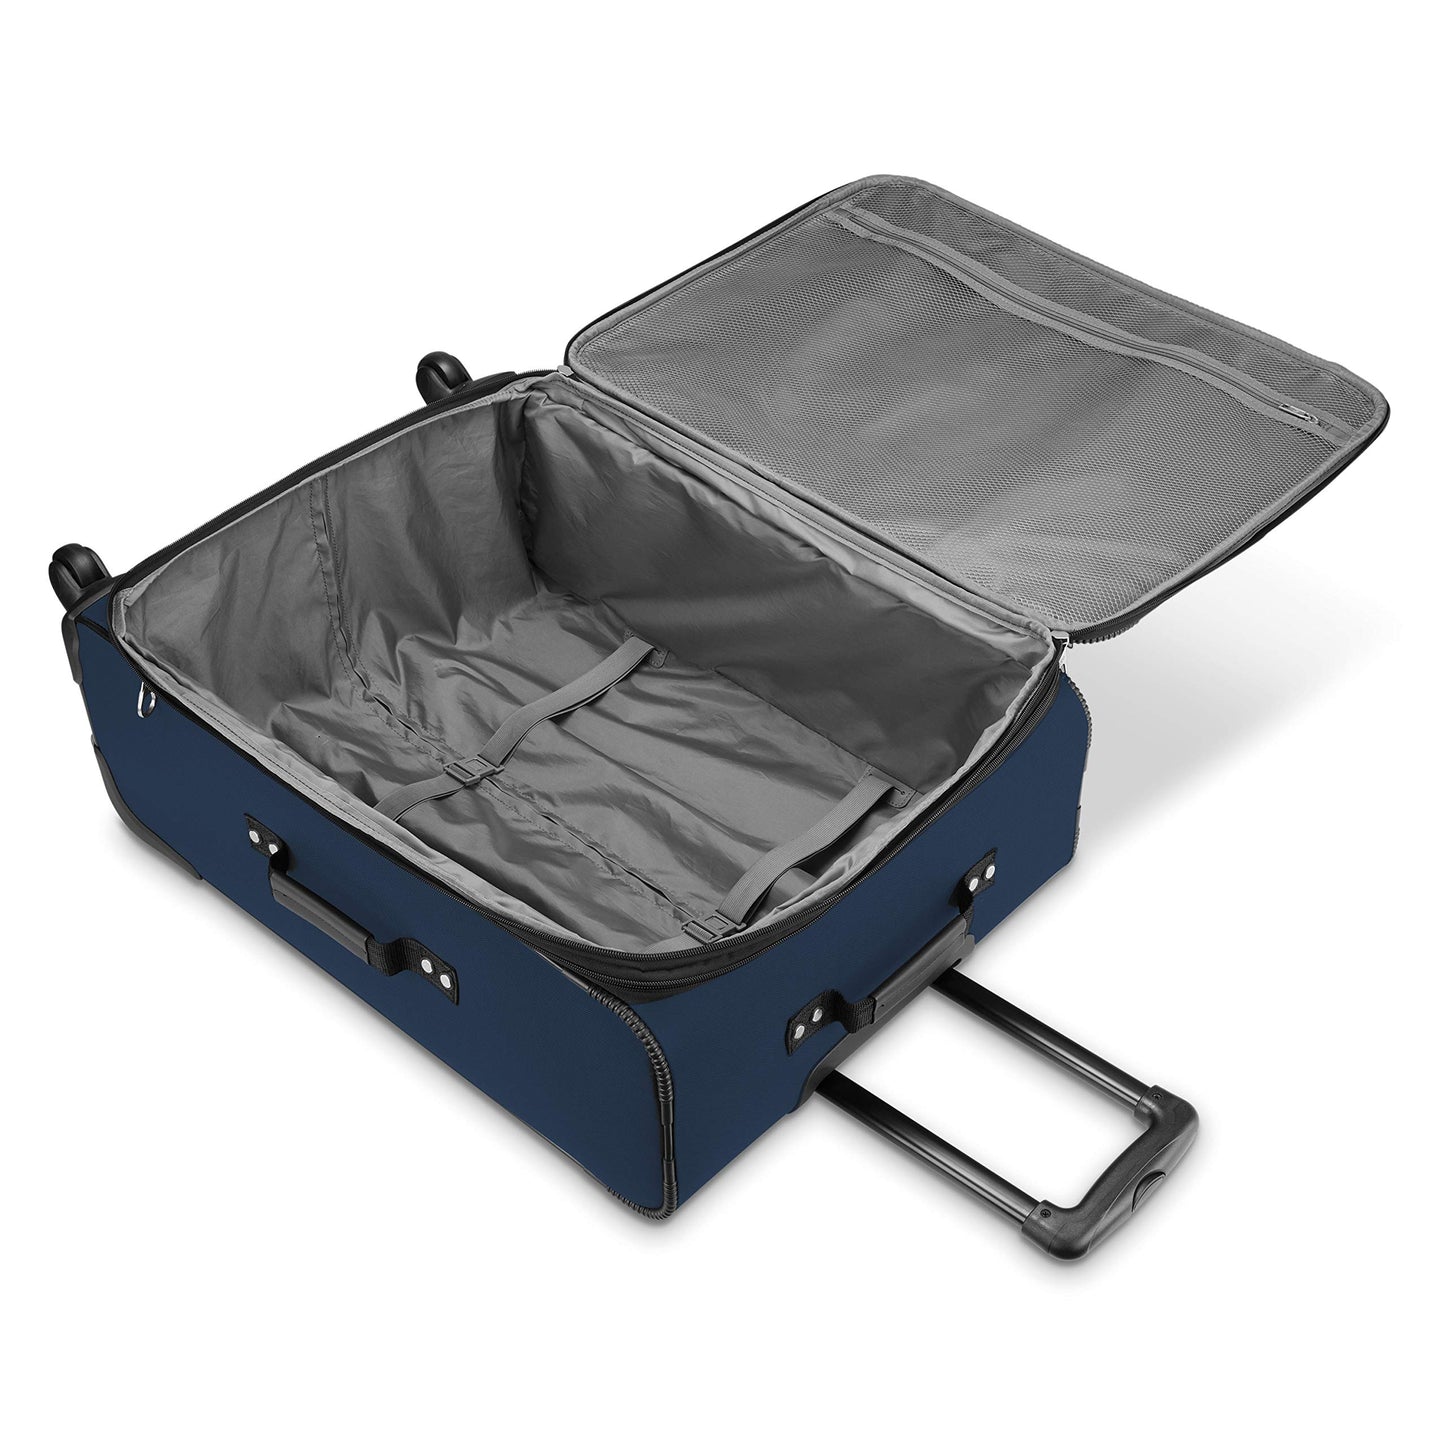 American Tourister Pop Max Softside Luggage with Spinner Wheels (Navy, Checked-Medium 25-Inch)